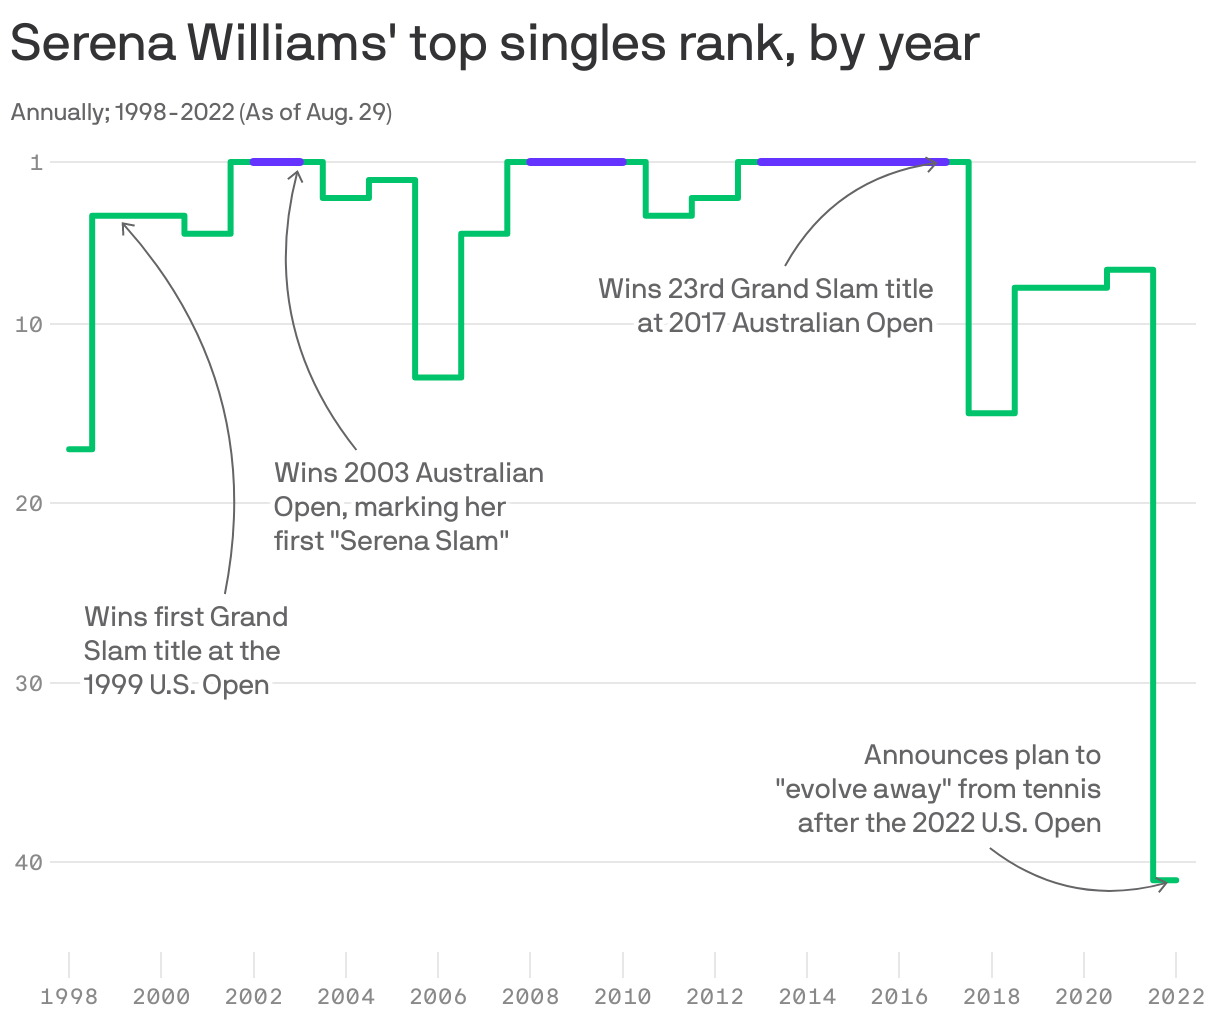 Serena Williams' top singles rank, by year